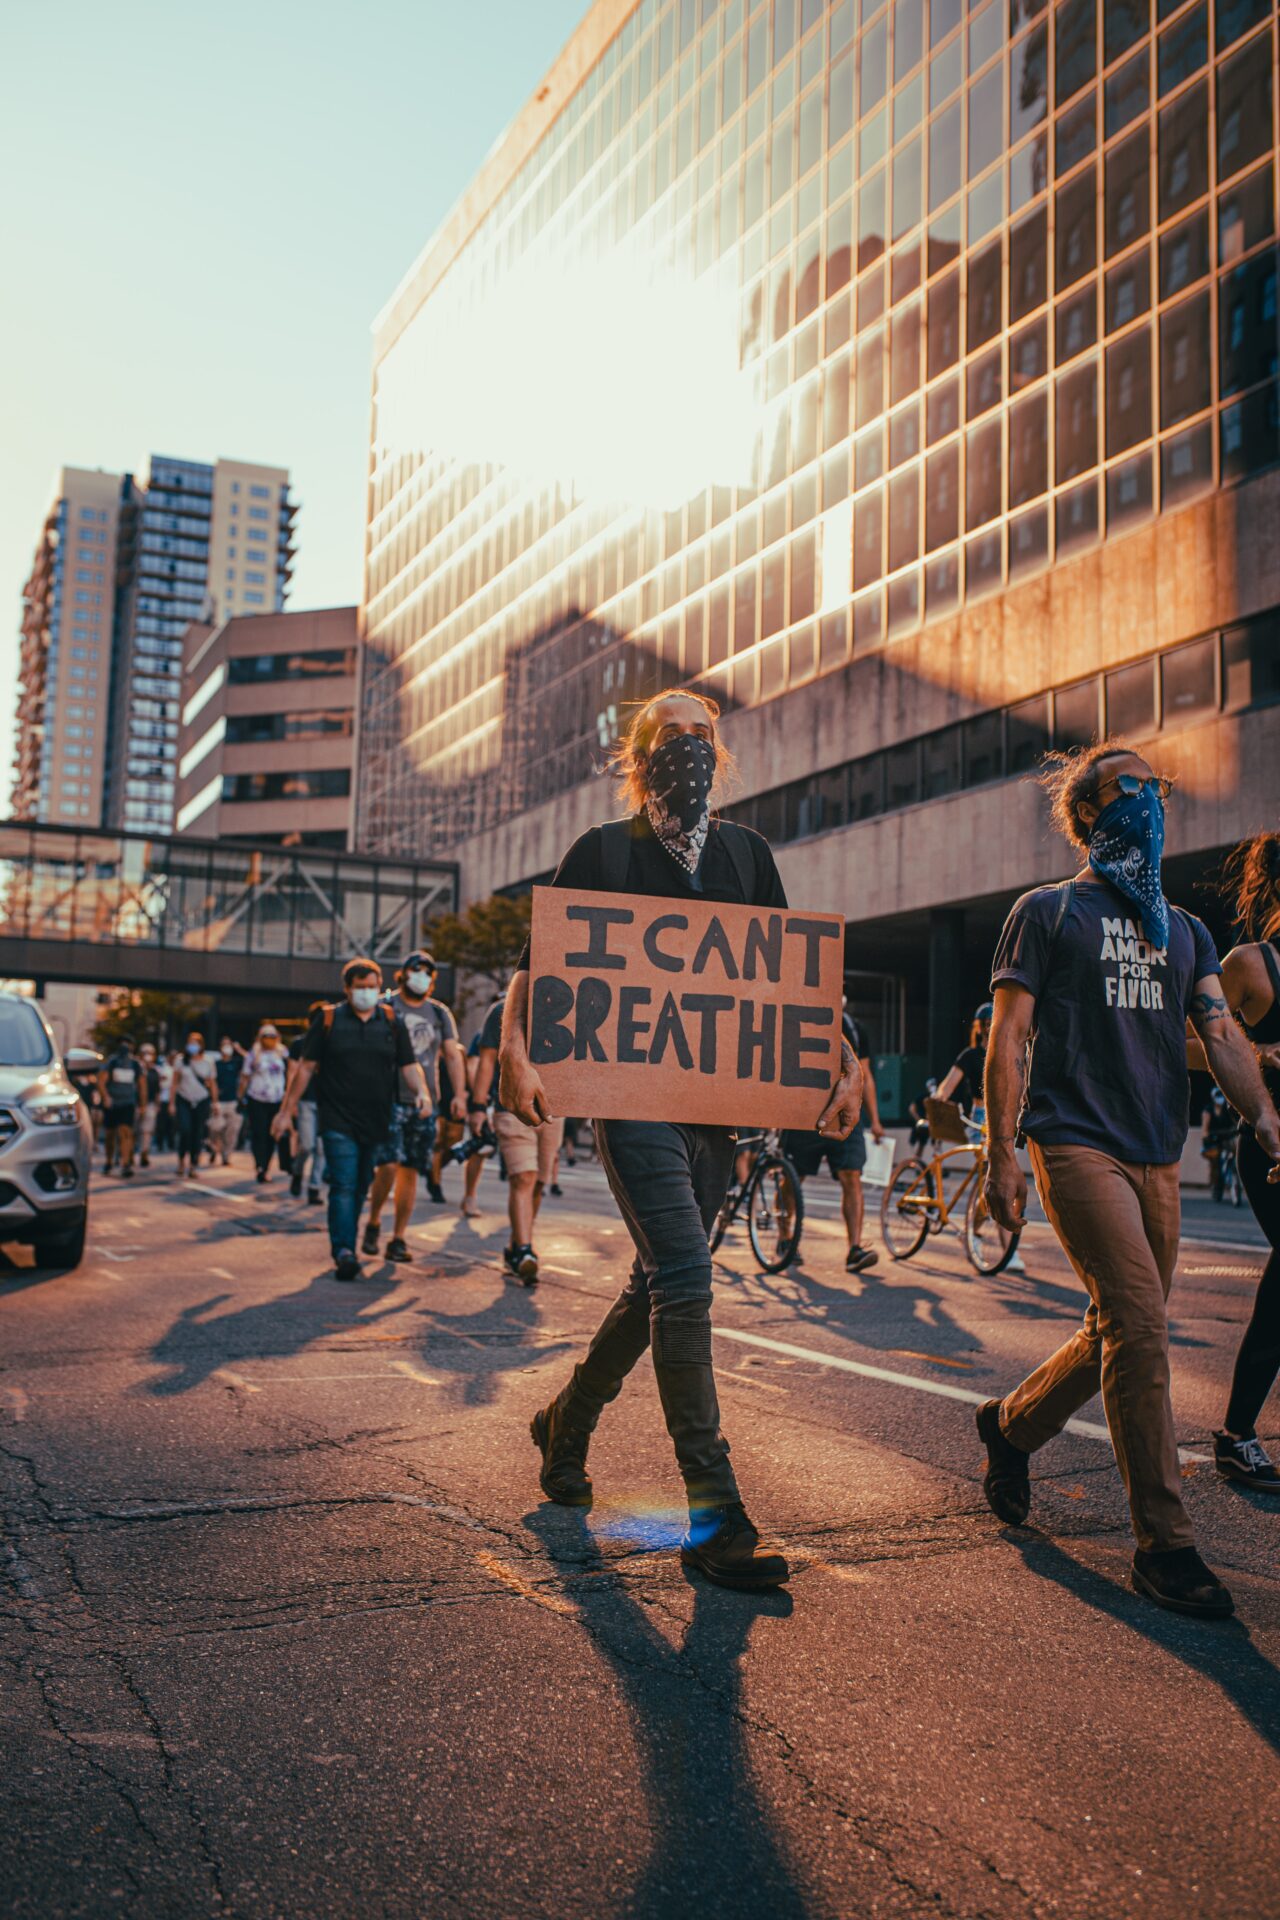 People wearing masks march in protest. One holds a sign reading "I can't breathe" (Photo by Josh Hild on Unsplash)